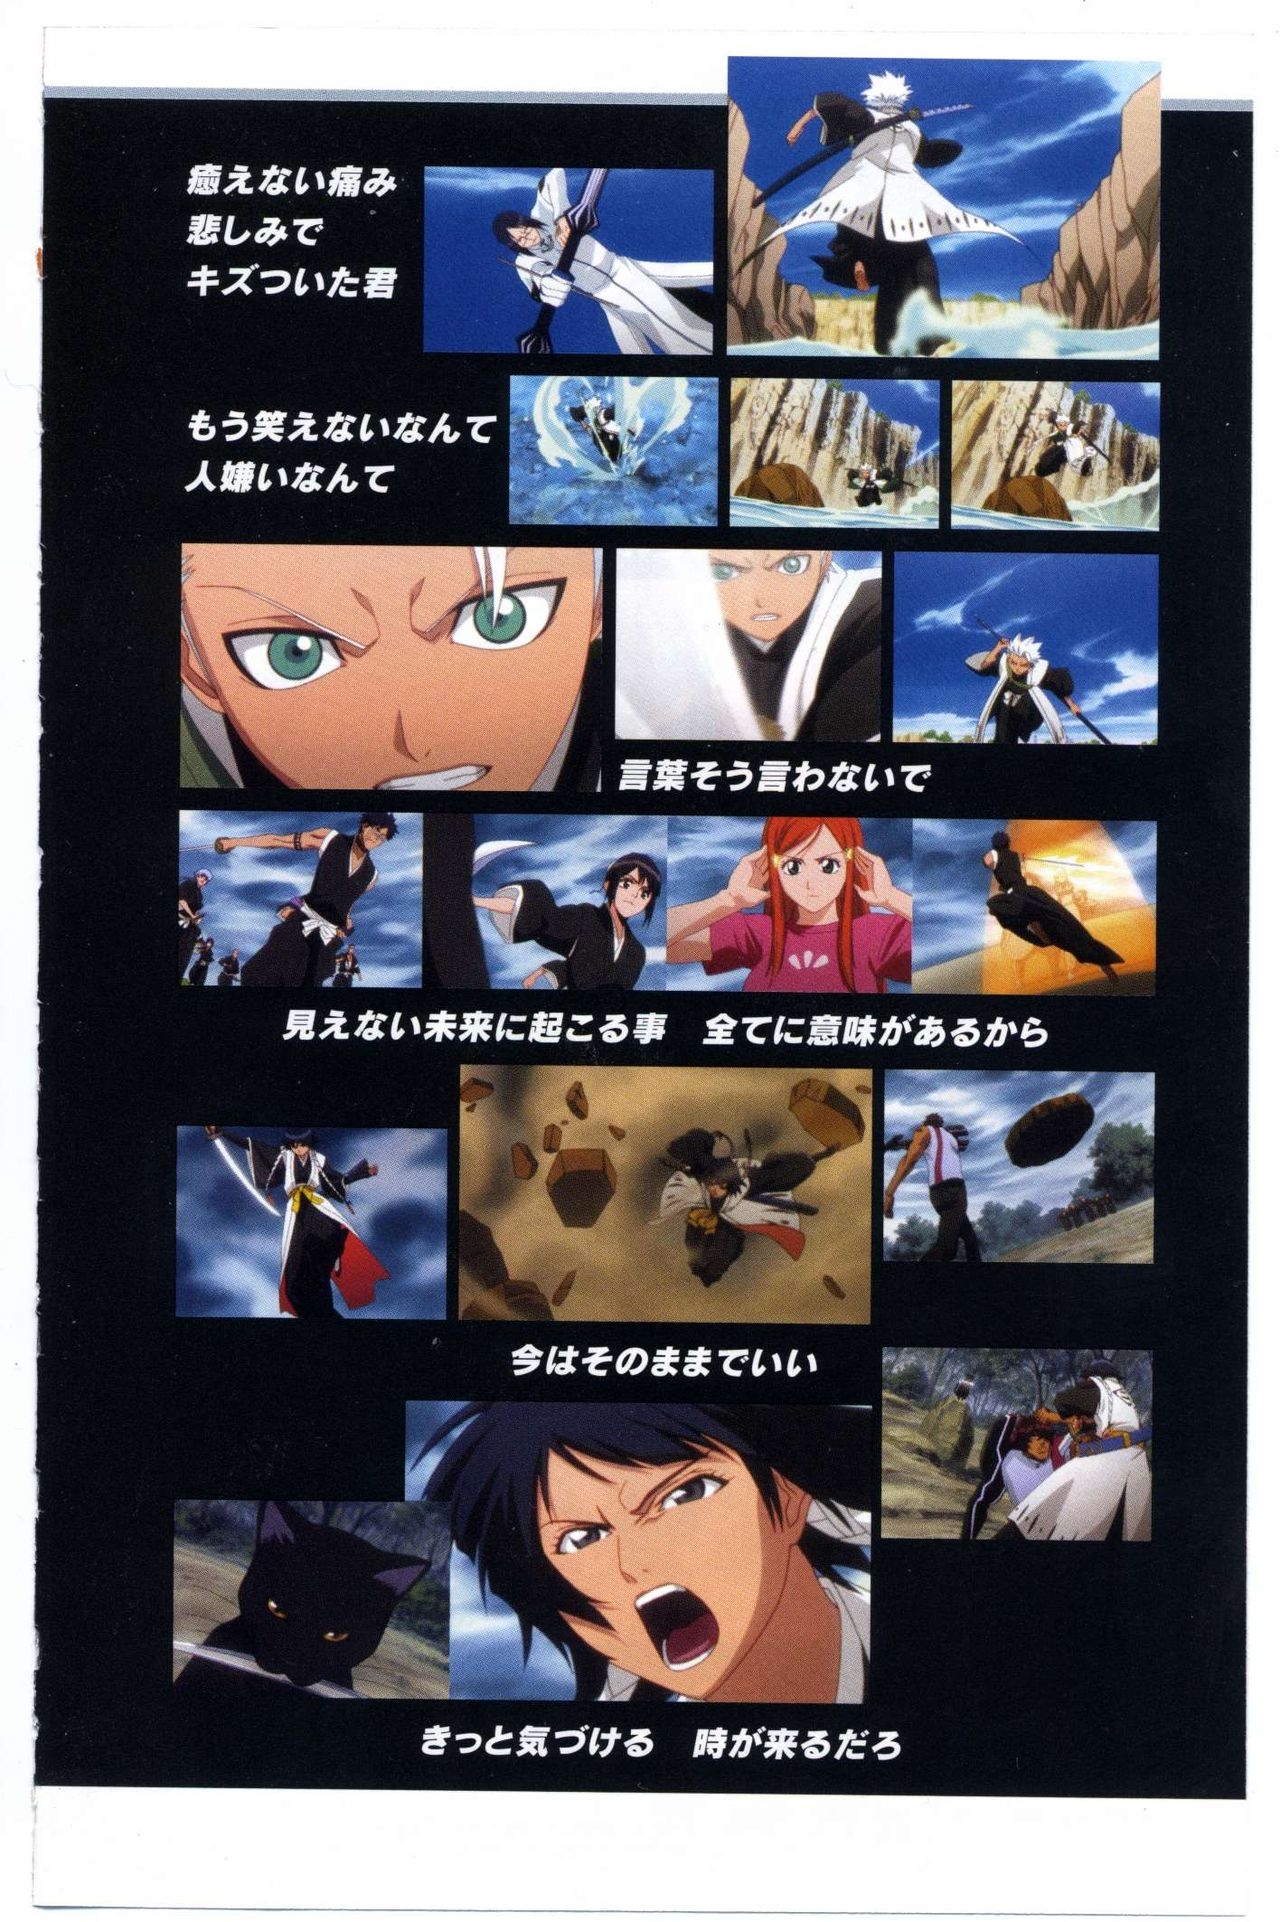 Bleach: Official Animation Book VIBEs 98